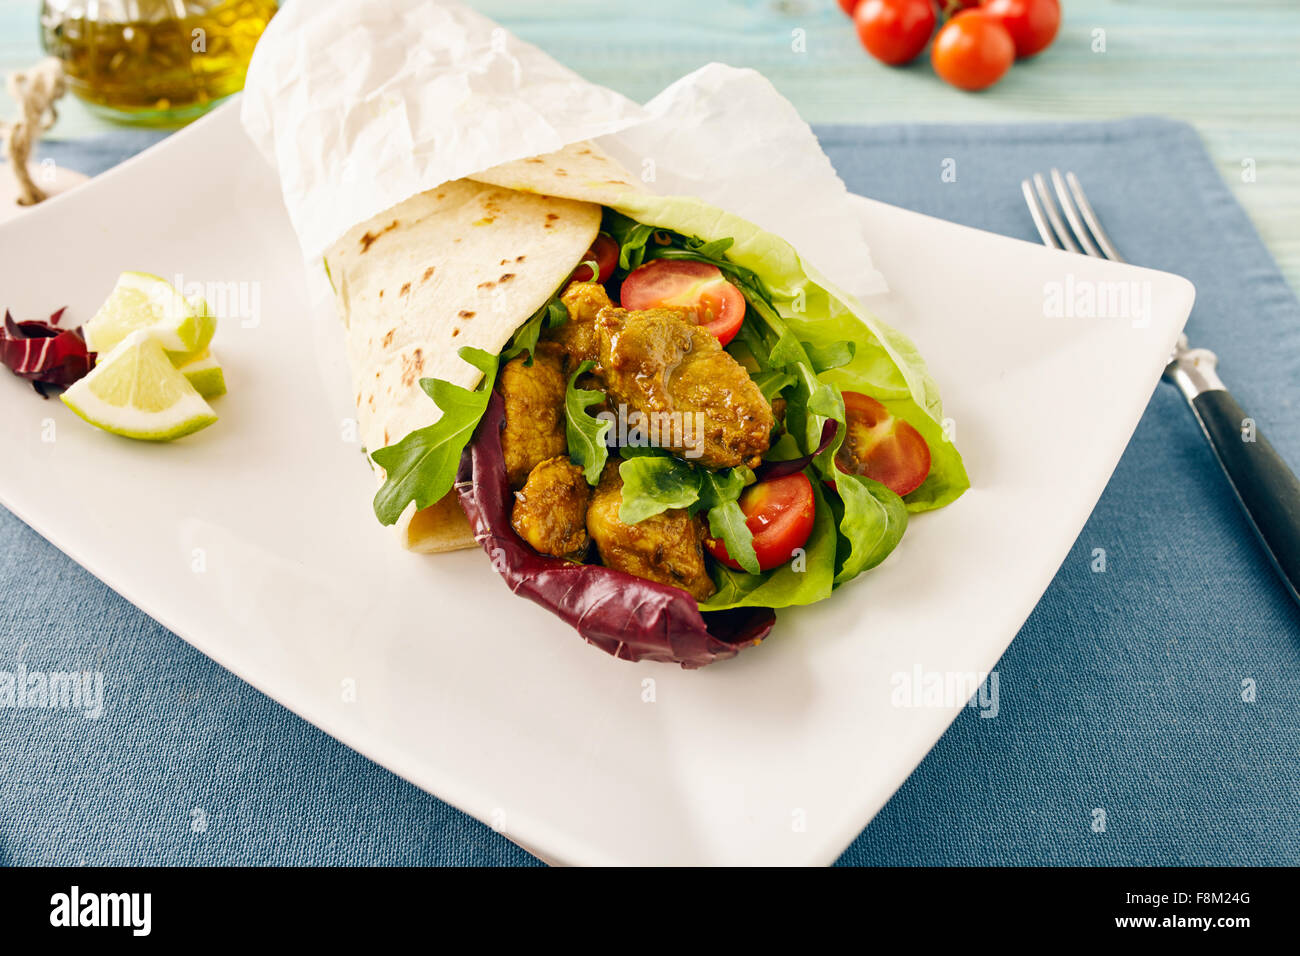 pork wraps on a white serving plate with rocket and lettuce, pastel colors Stock Photo